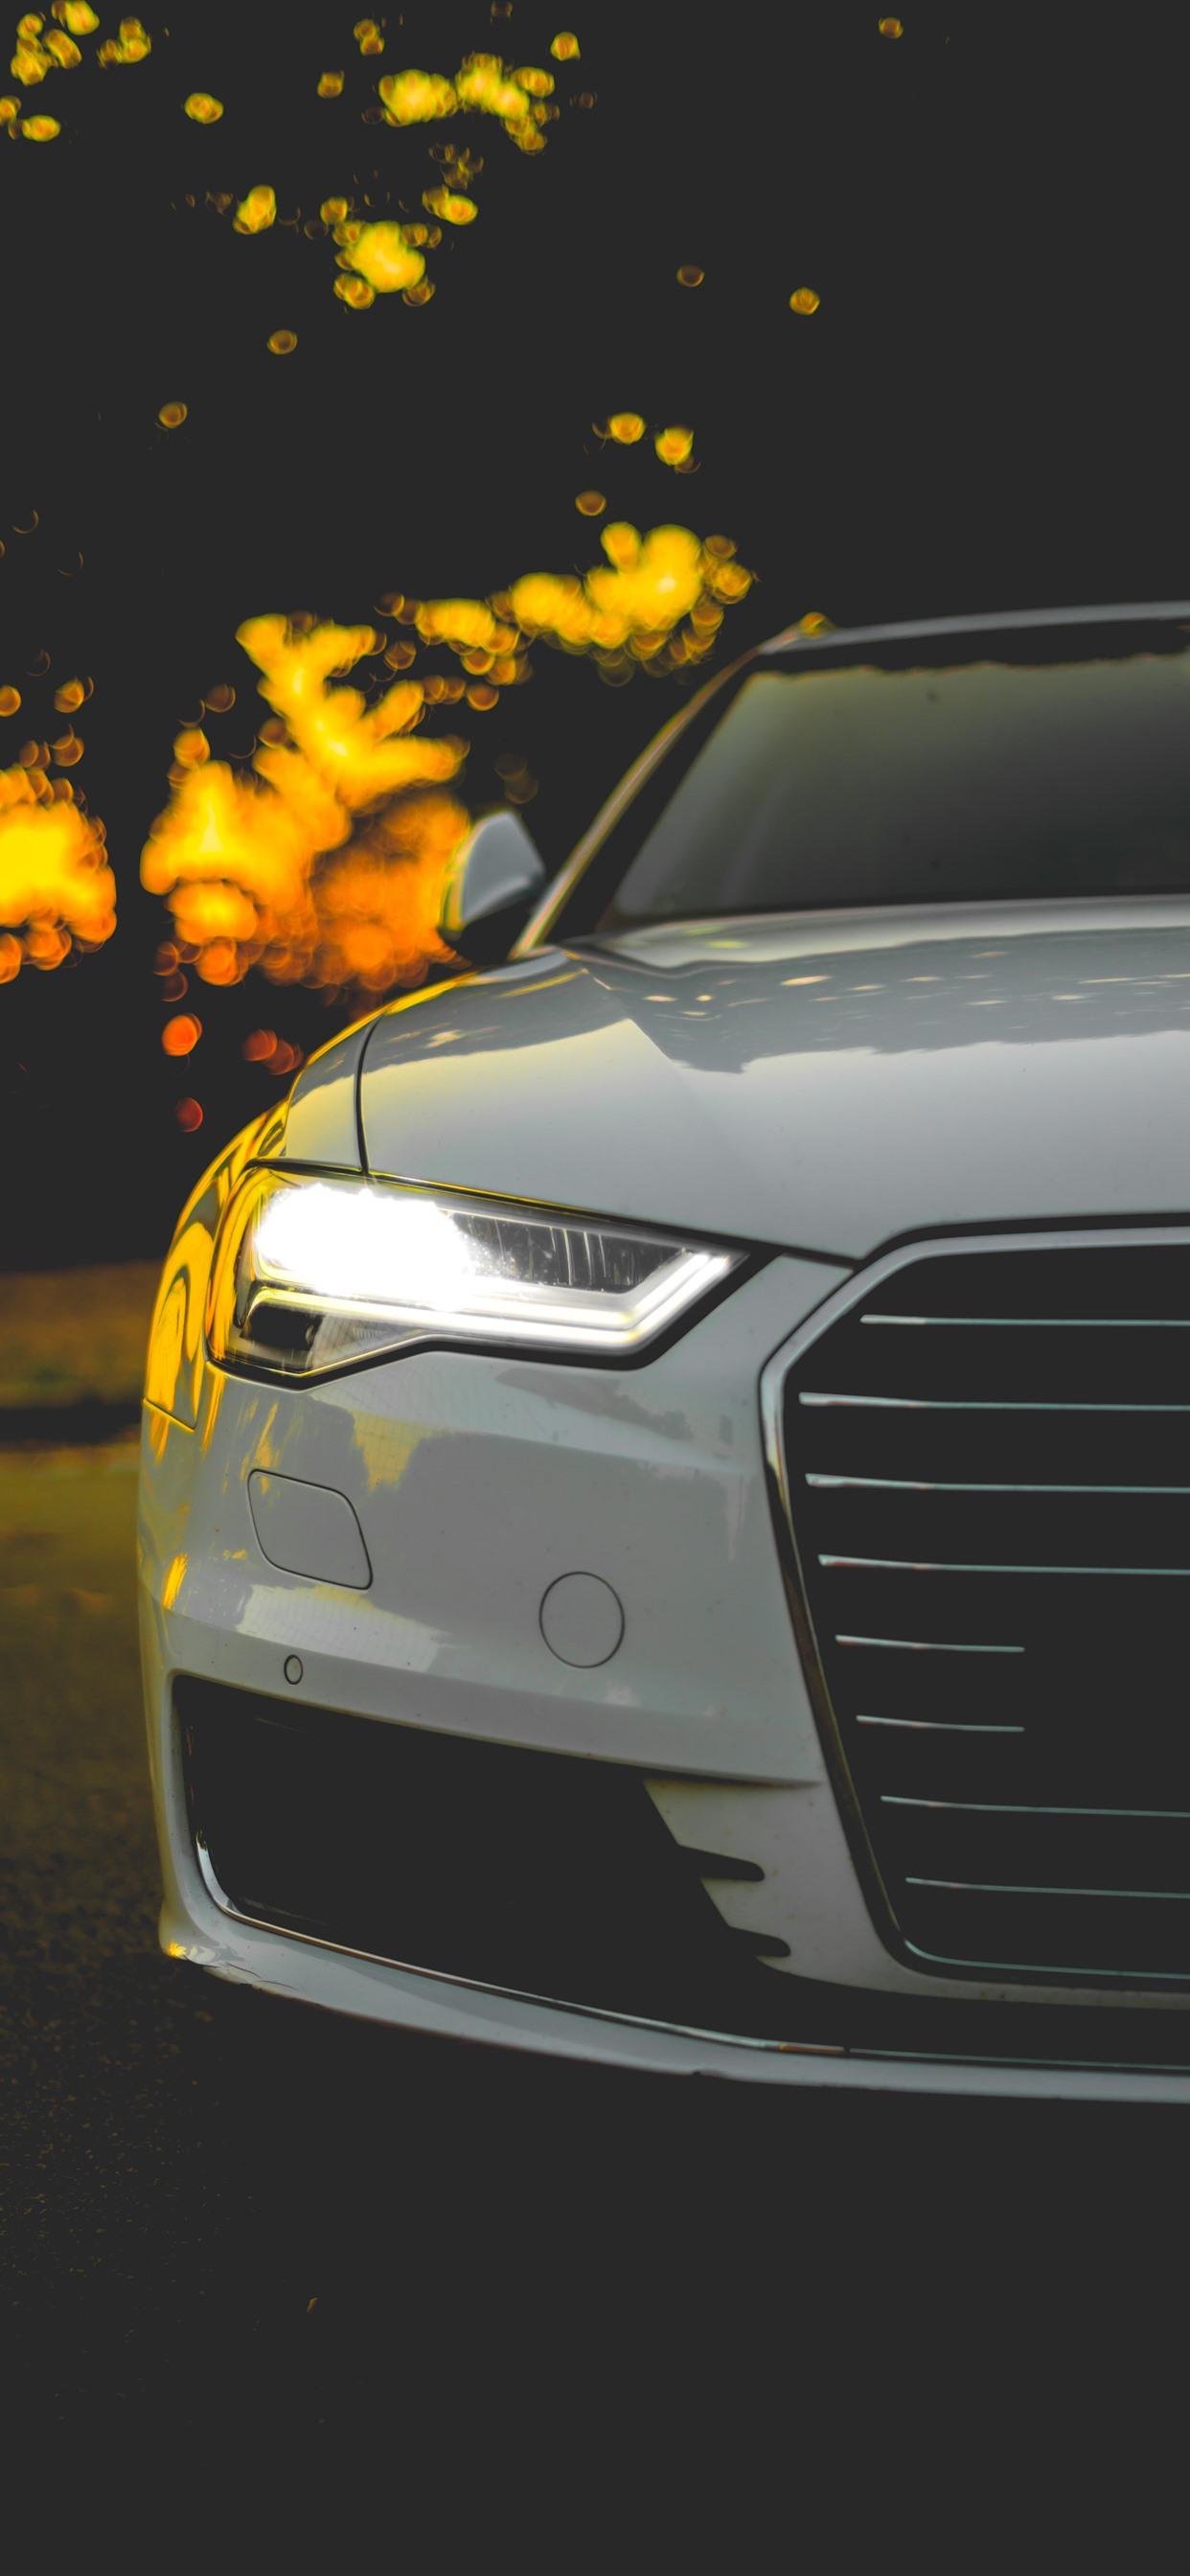 Audi white car front view, headlight 1242x2688 iPhone XS Max